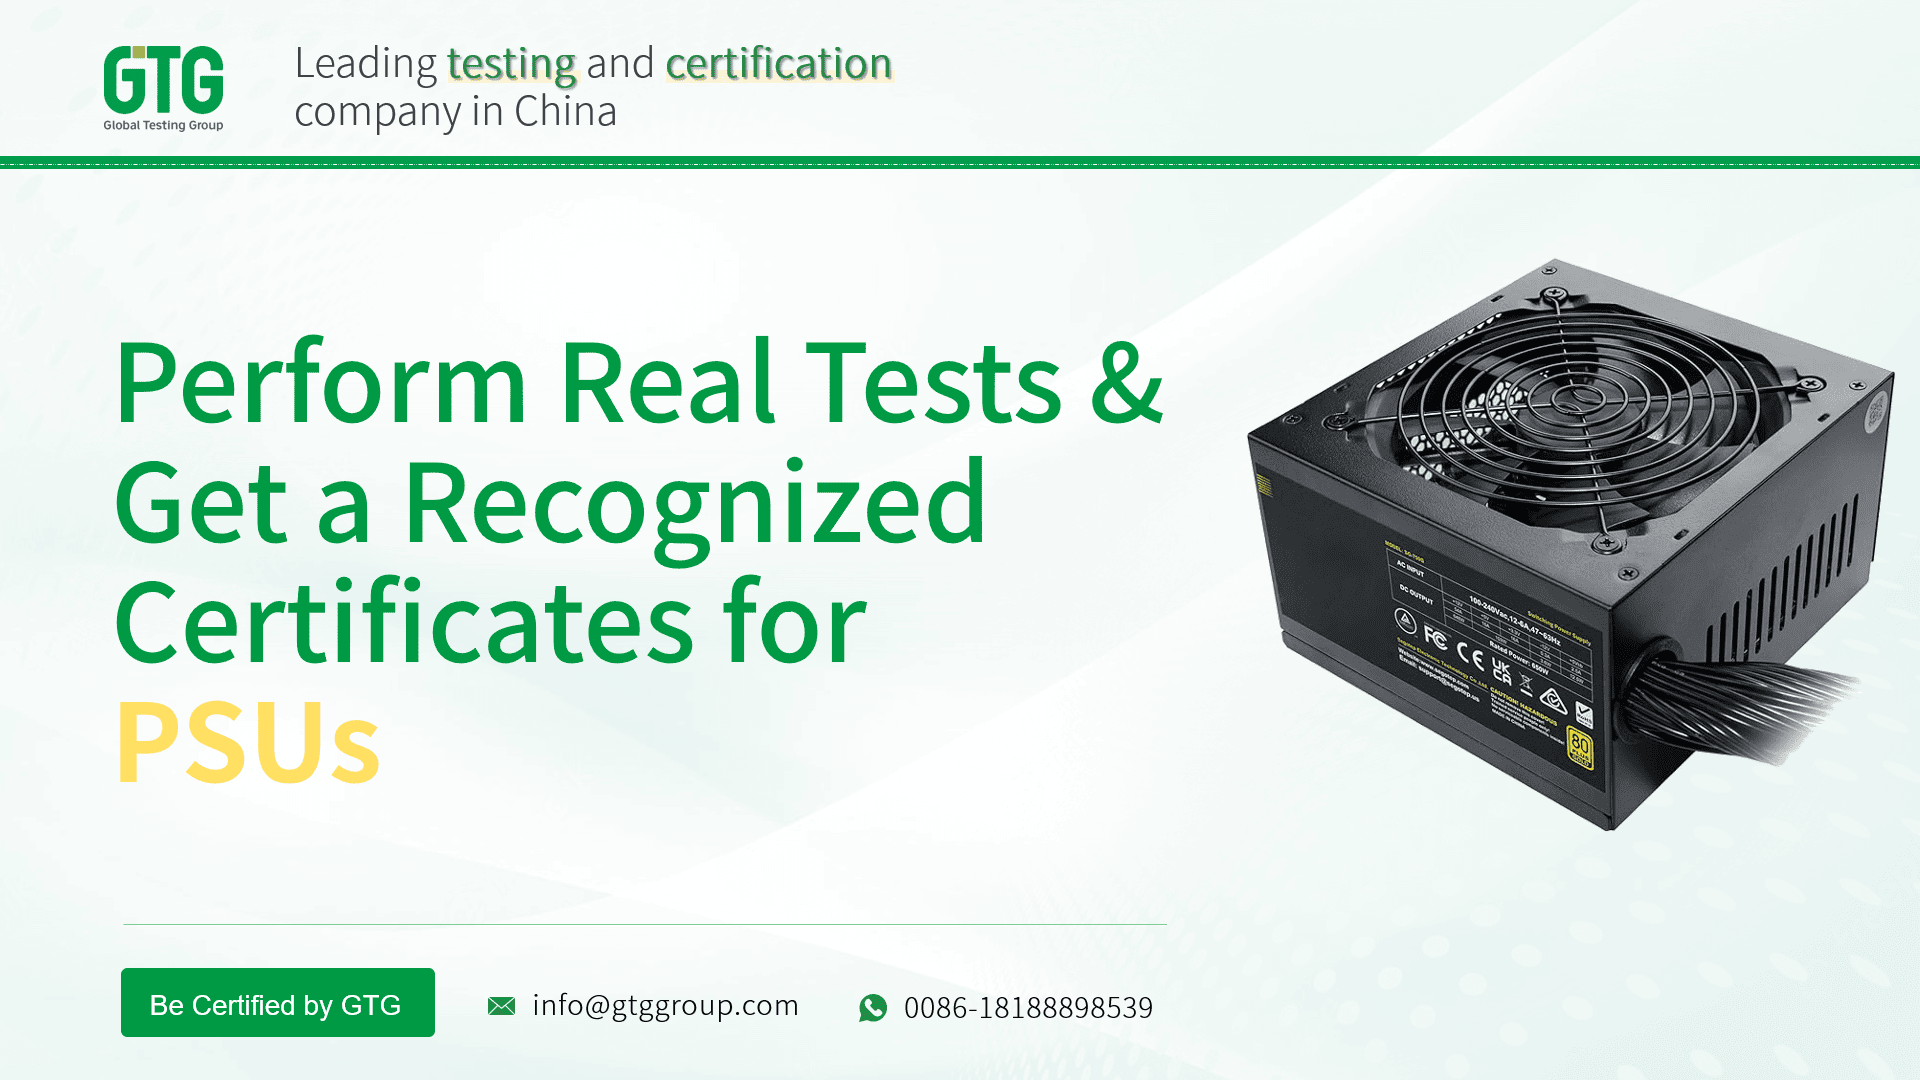 Get Test Report and Certifications for PC Power Supply Units (PSUs) from GTG Group